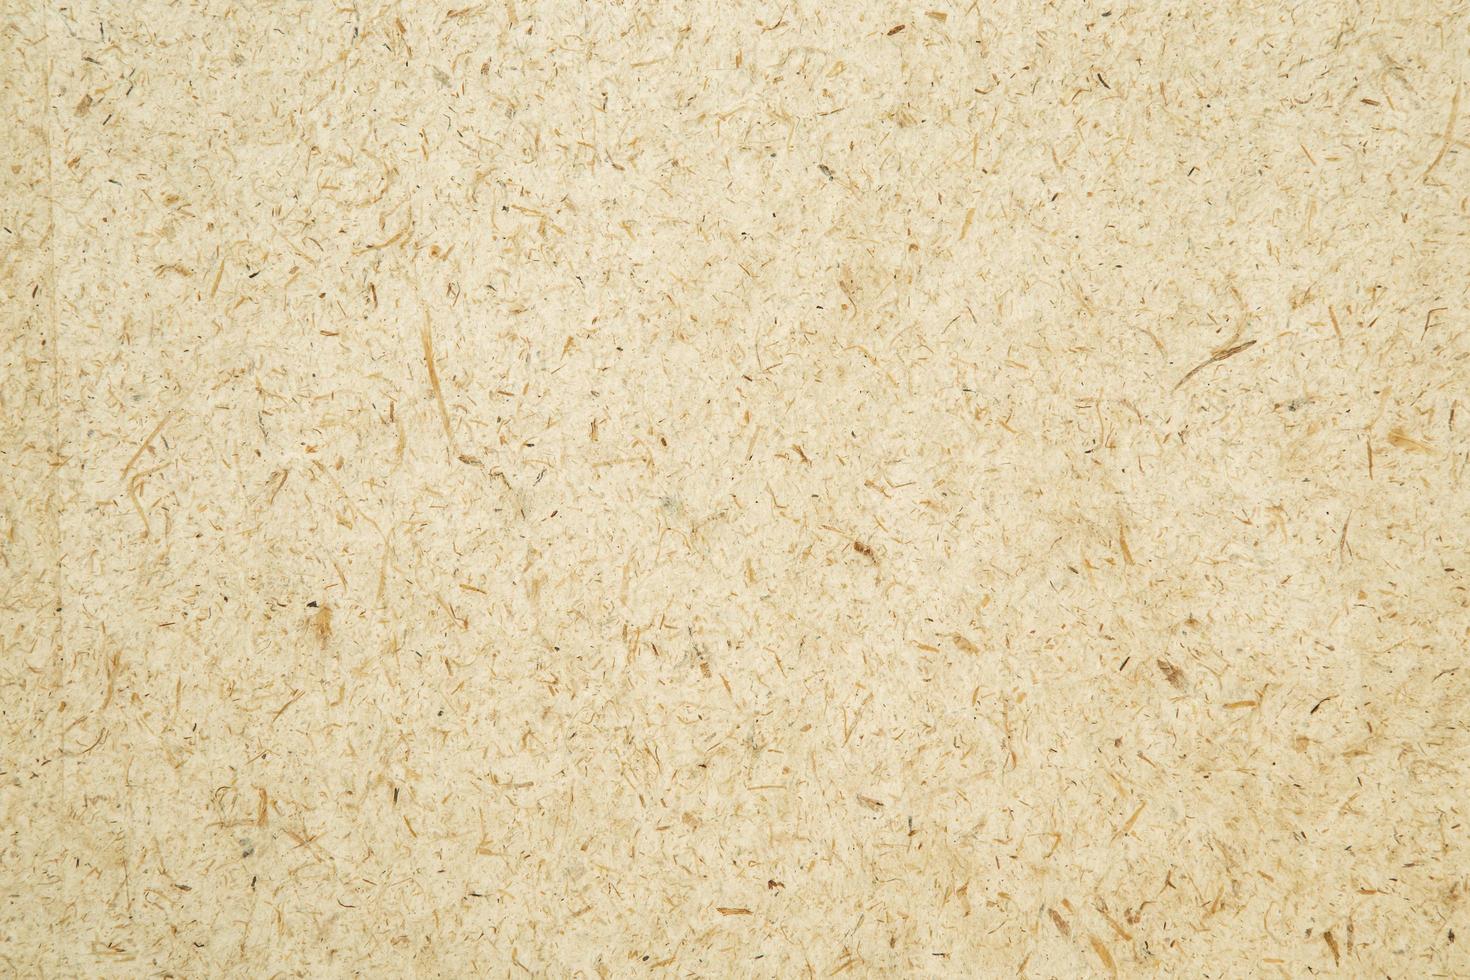 mulberry paper texture and background close up photo